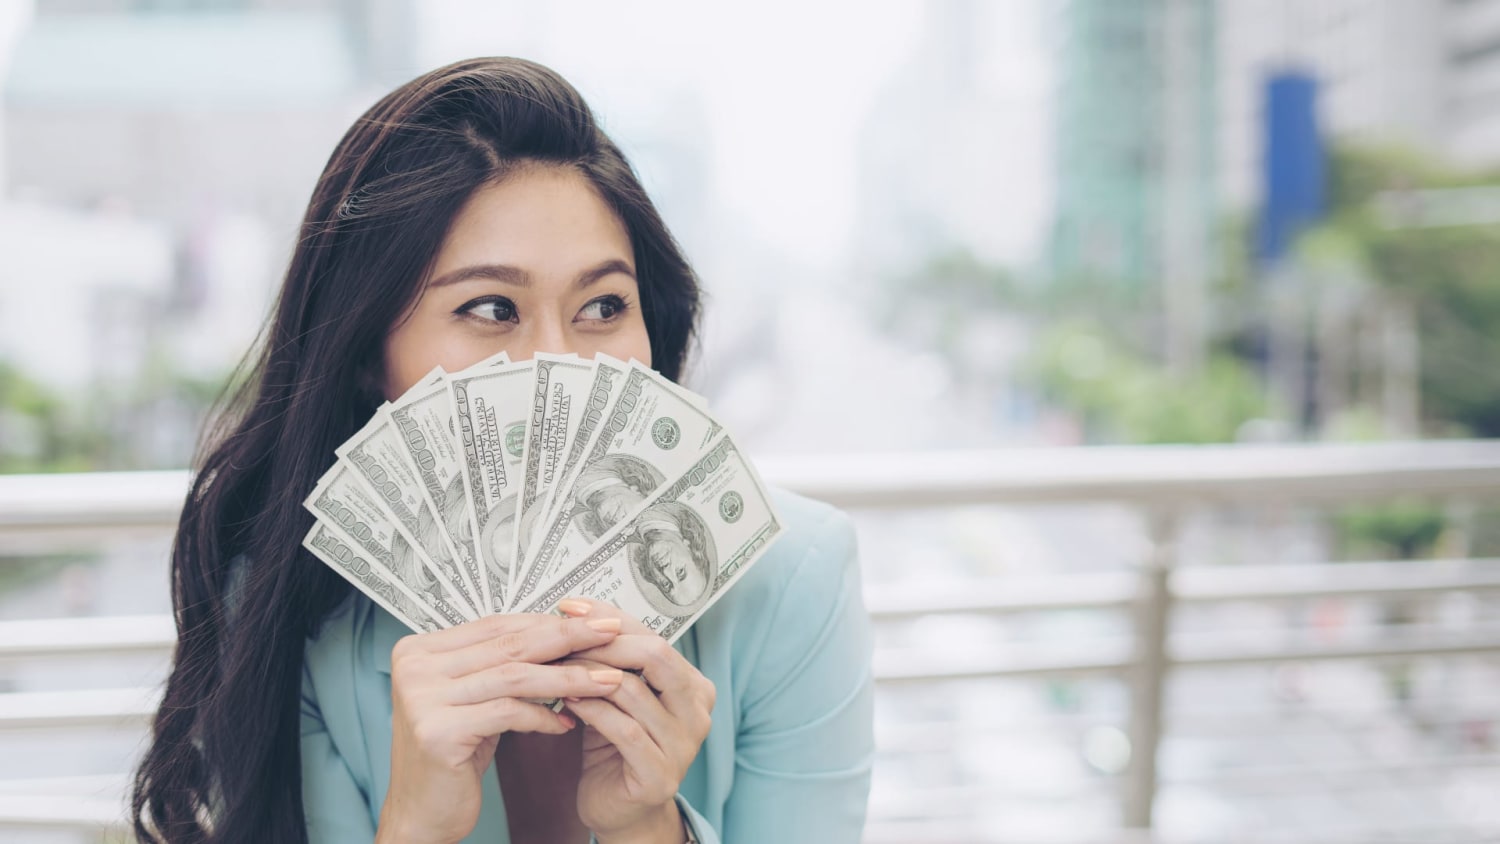 Here's how to feel richer with the money you already have